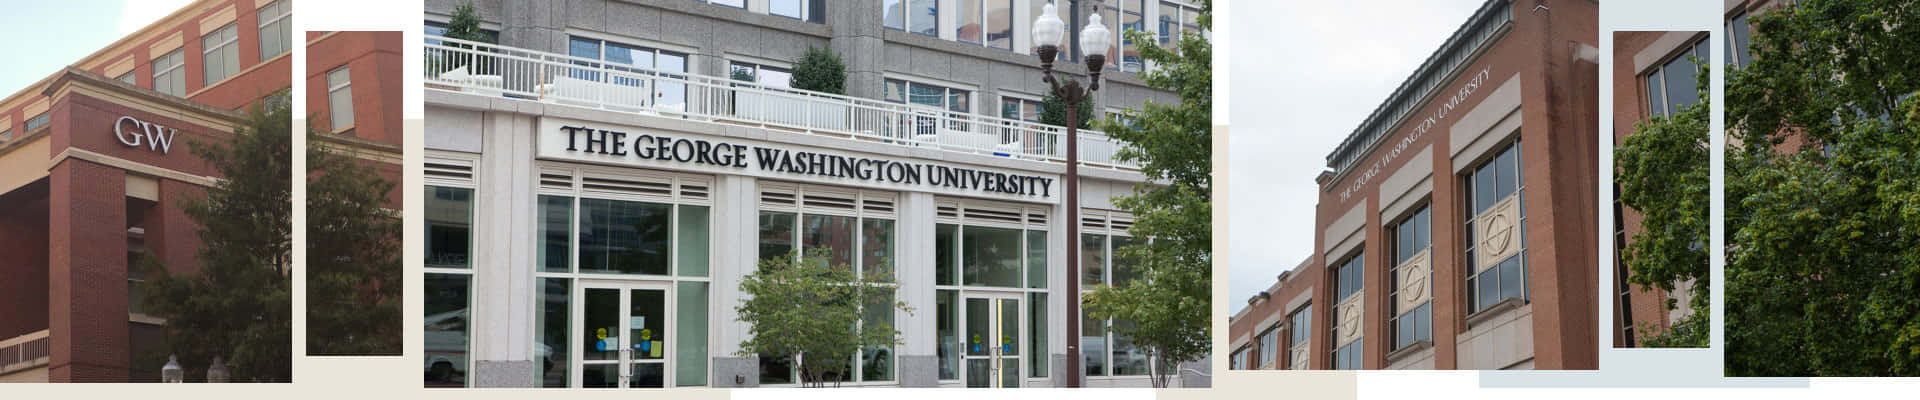 Collage Of George Washington University Buildings Picture